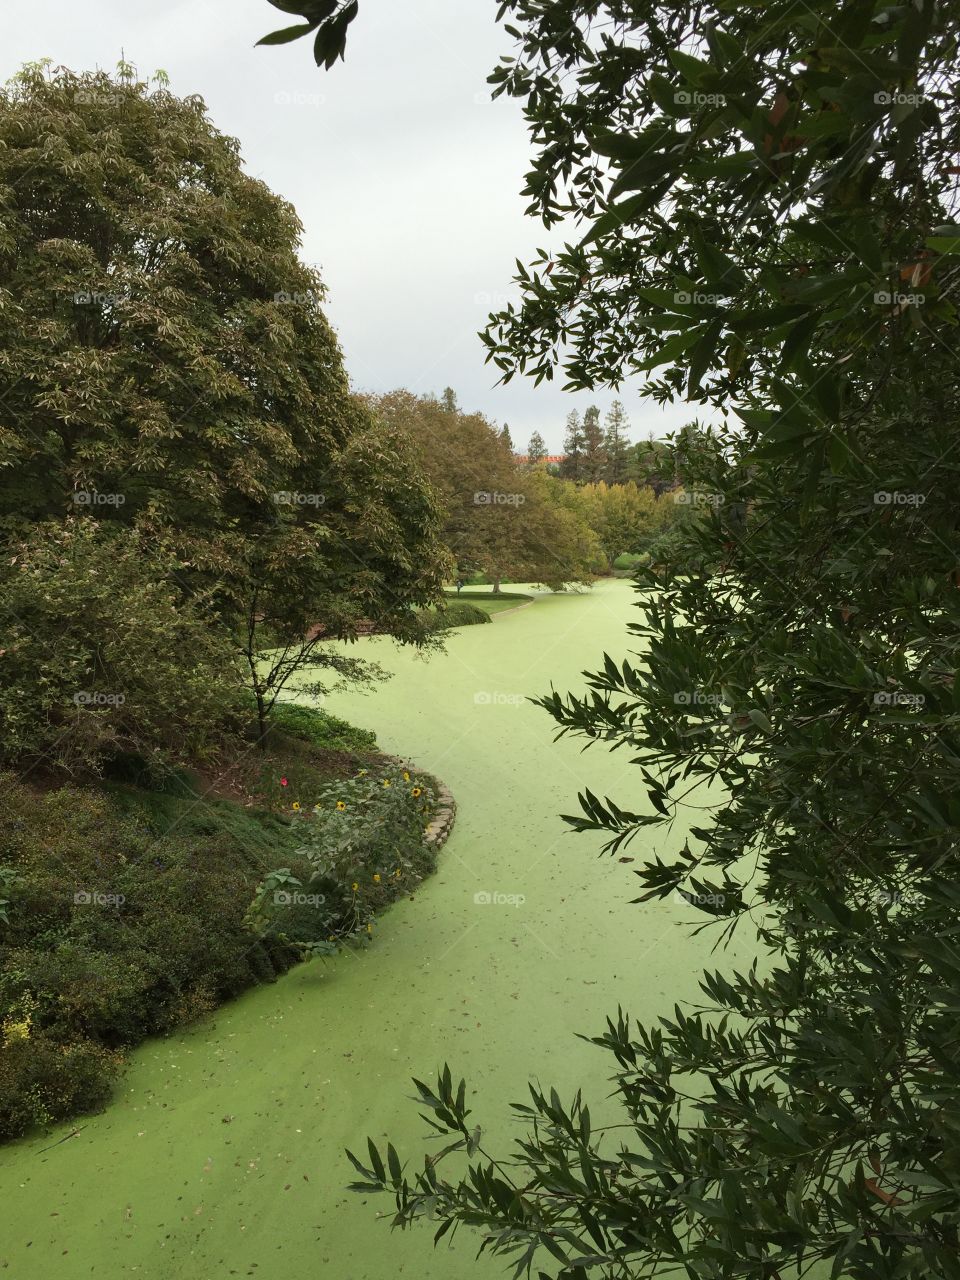 Duckweed connects the two sides of the pond